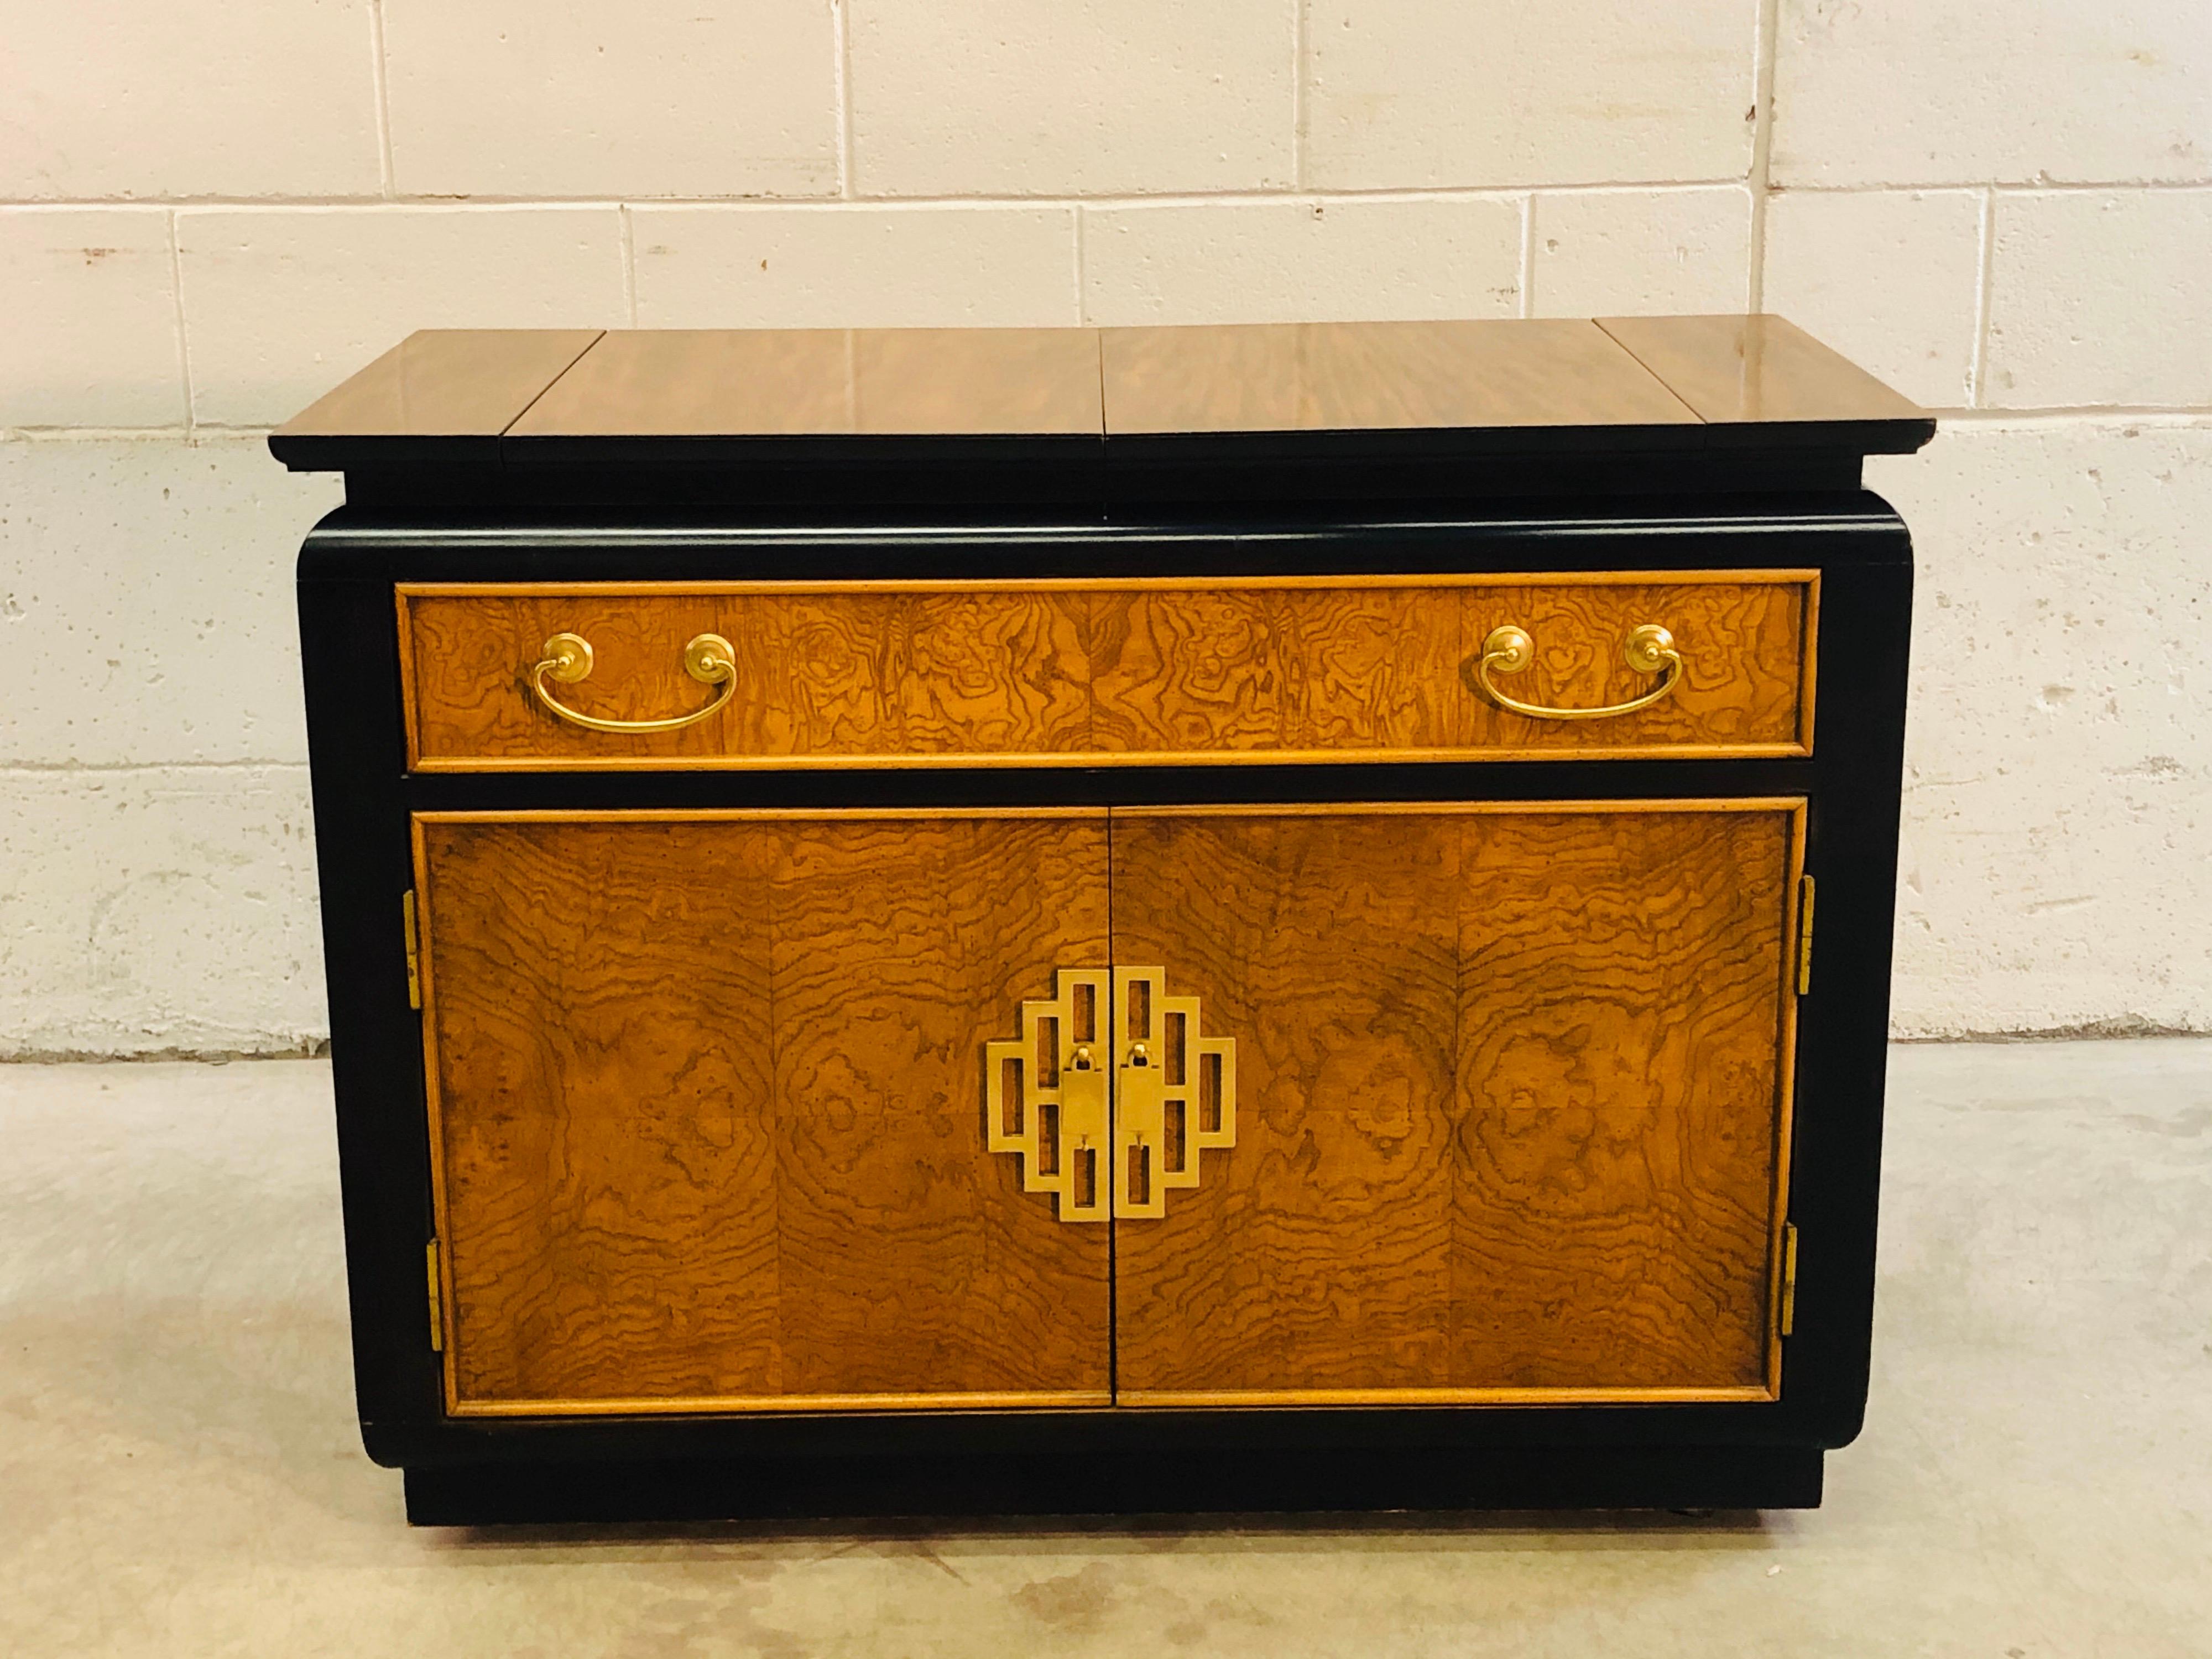 Vintage 1970s rolling bar cart or sideboard designed by Ray Sabota for Century Furniture. The cart has a burl wood inset on a ebonized base and great Asian Modern brass handles. Marked in drawer. Excellent condition. Top fully open is 58” L.